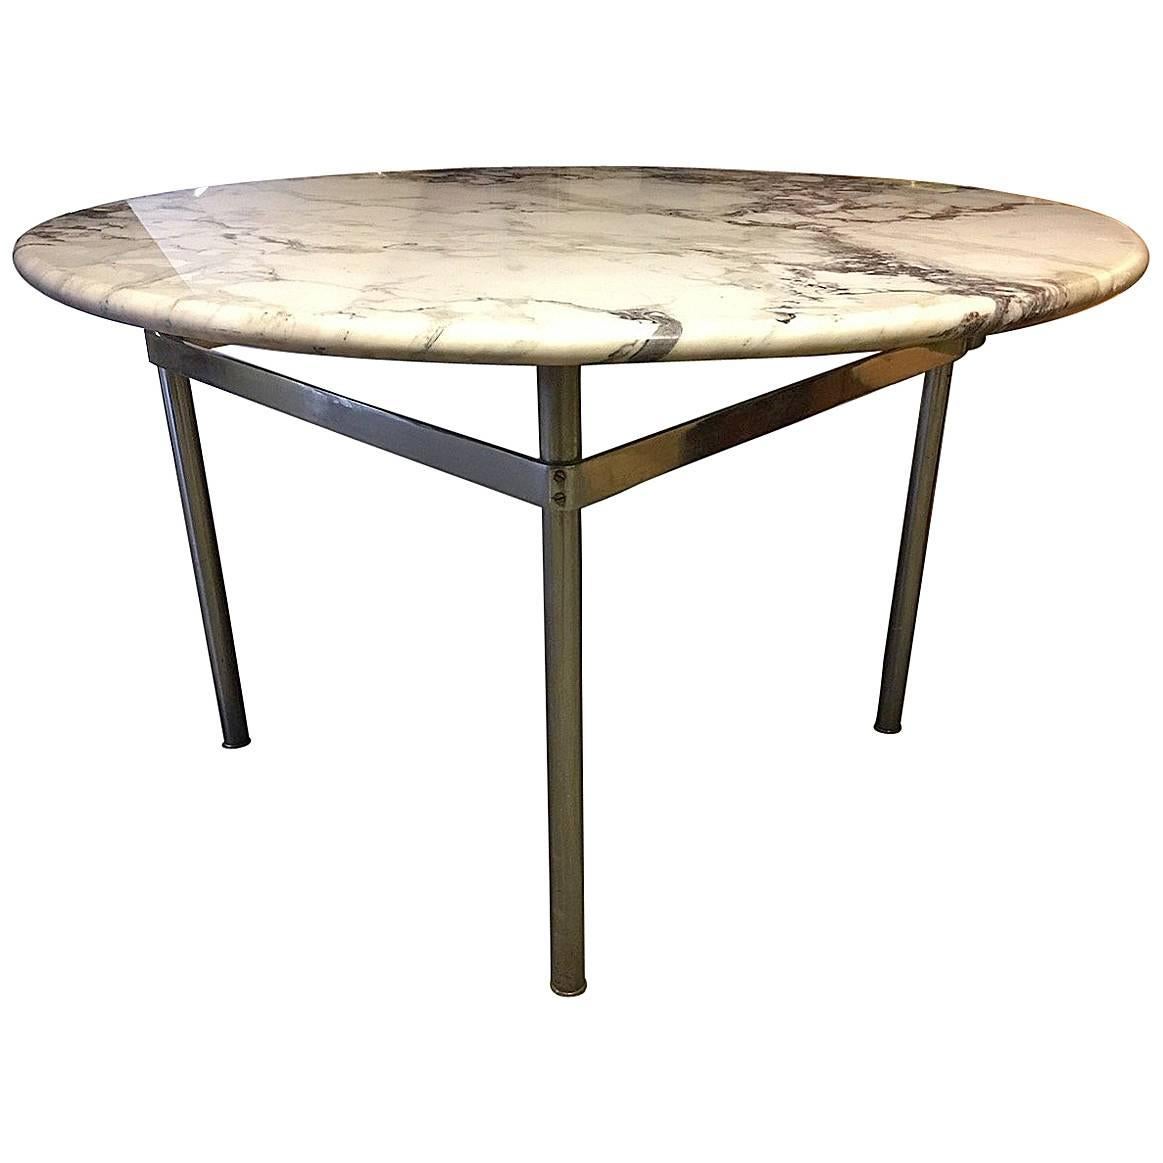 Dining Table with Wonderful Marble Top and Matt Chromed Base